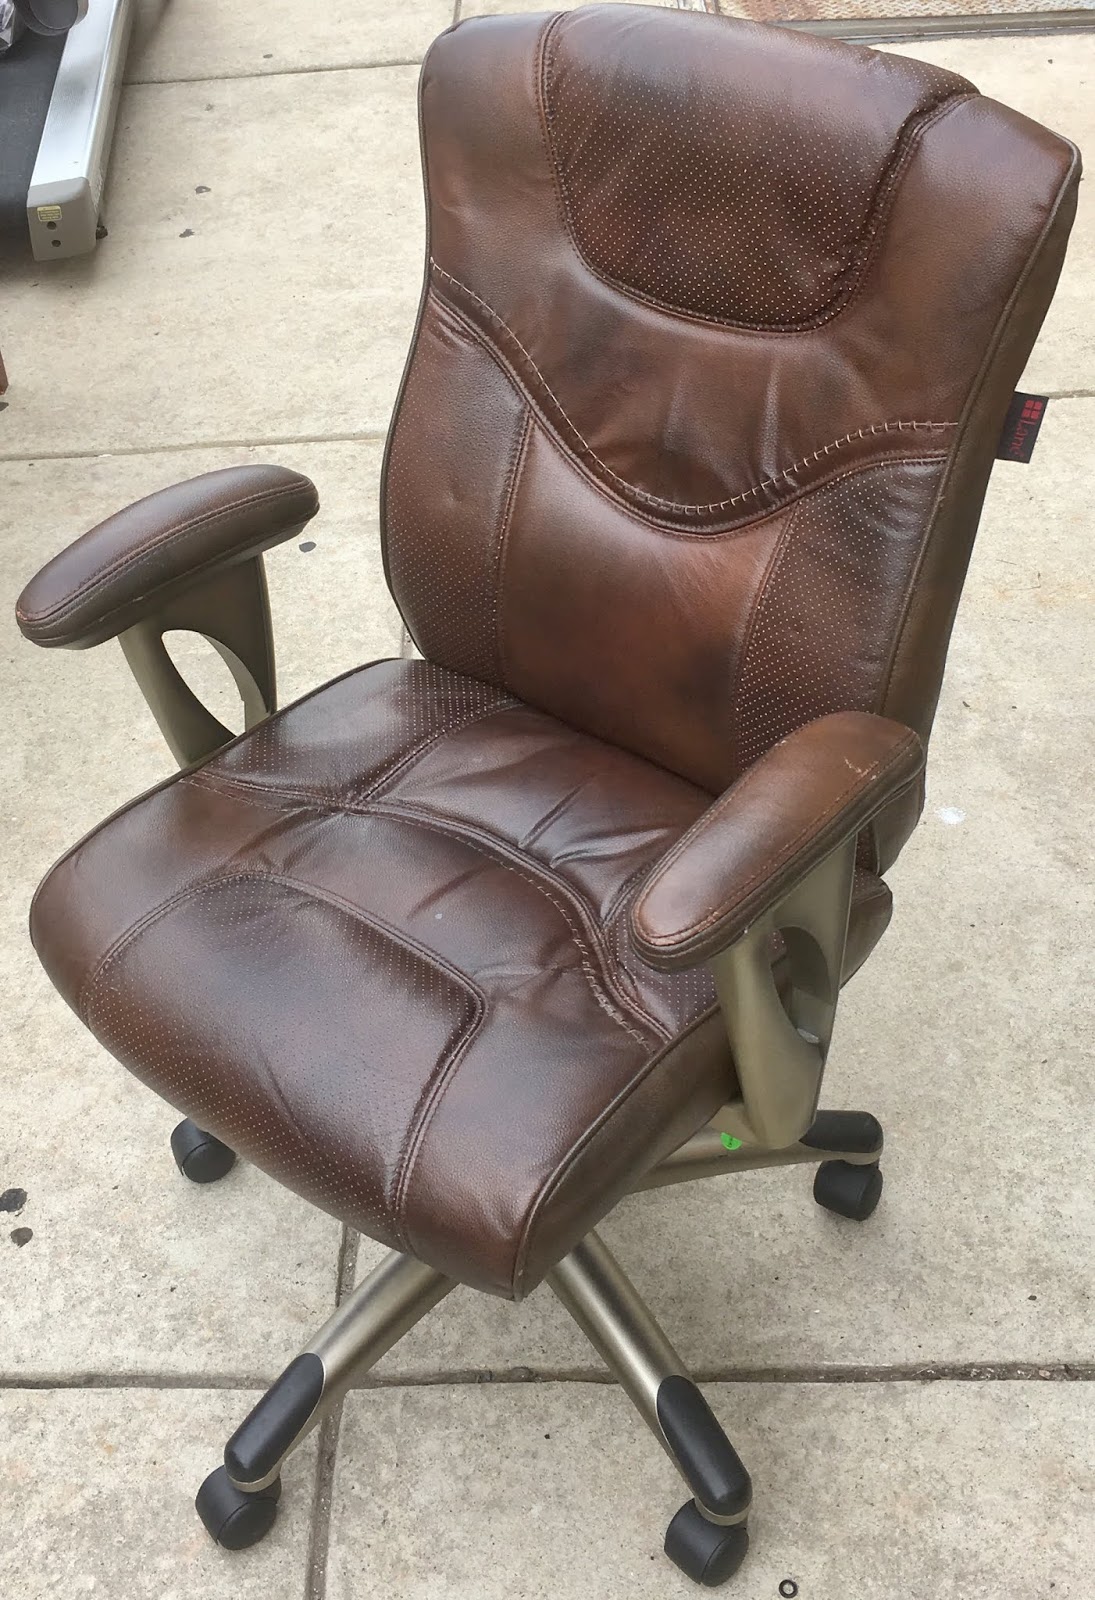 Uhuru Furniture Collectibles Brown Leather Desk Chair By Lane